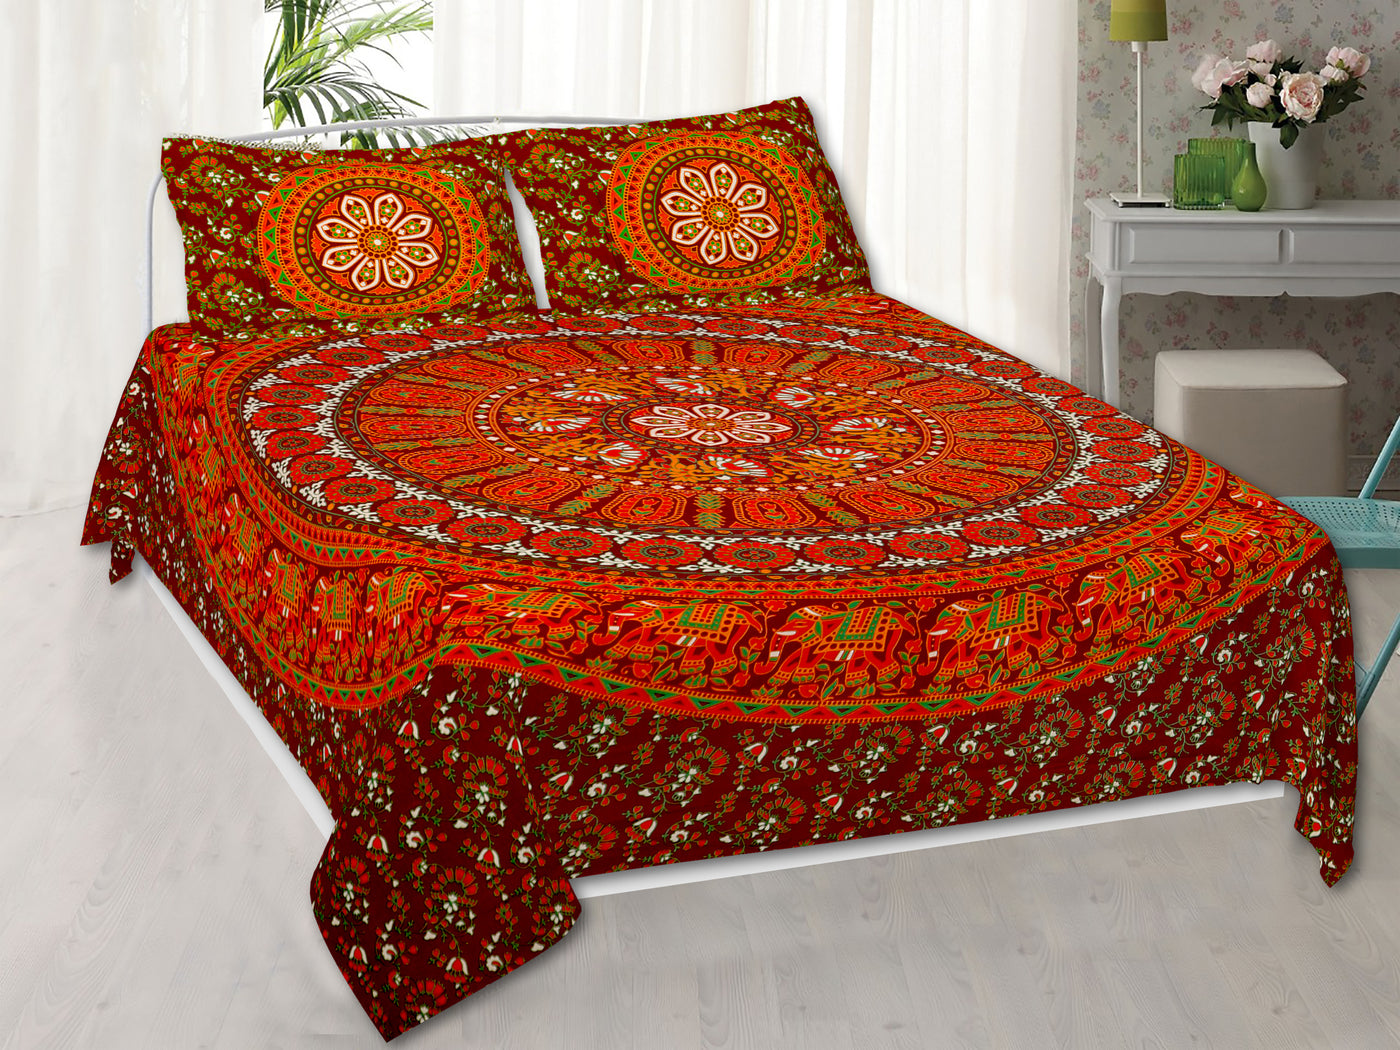 Braise Premium | Full Size 90 x 108 in | 100% Pure Cotton | Double Bedsheet with 2 Pillow Covers (Barmeri Designs)